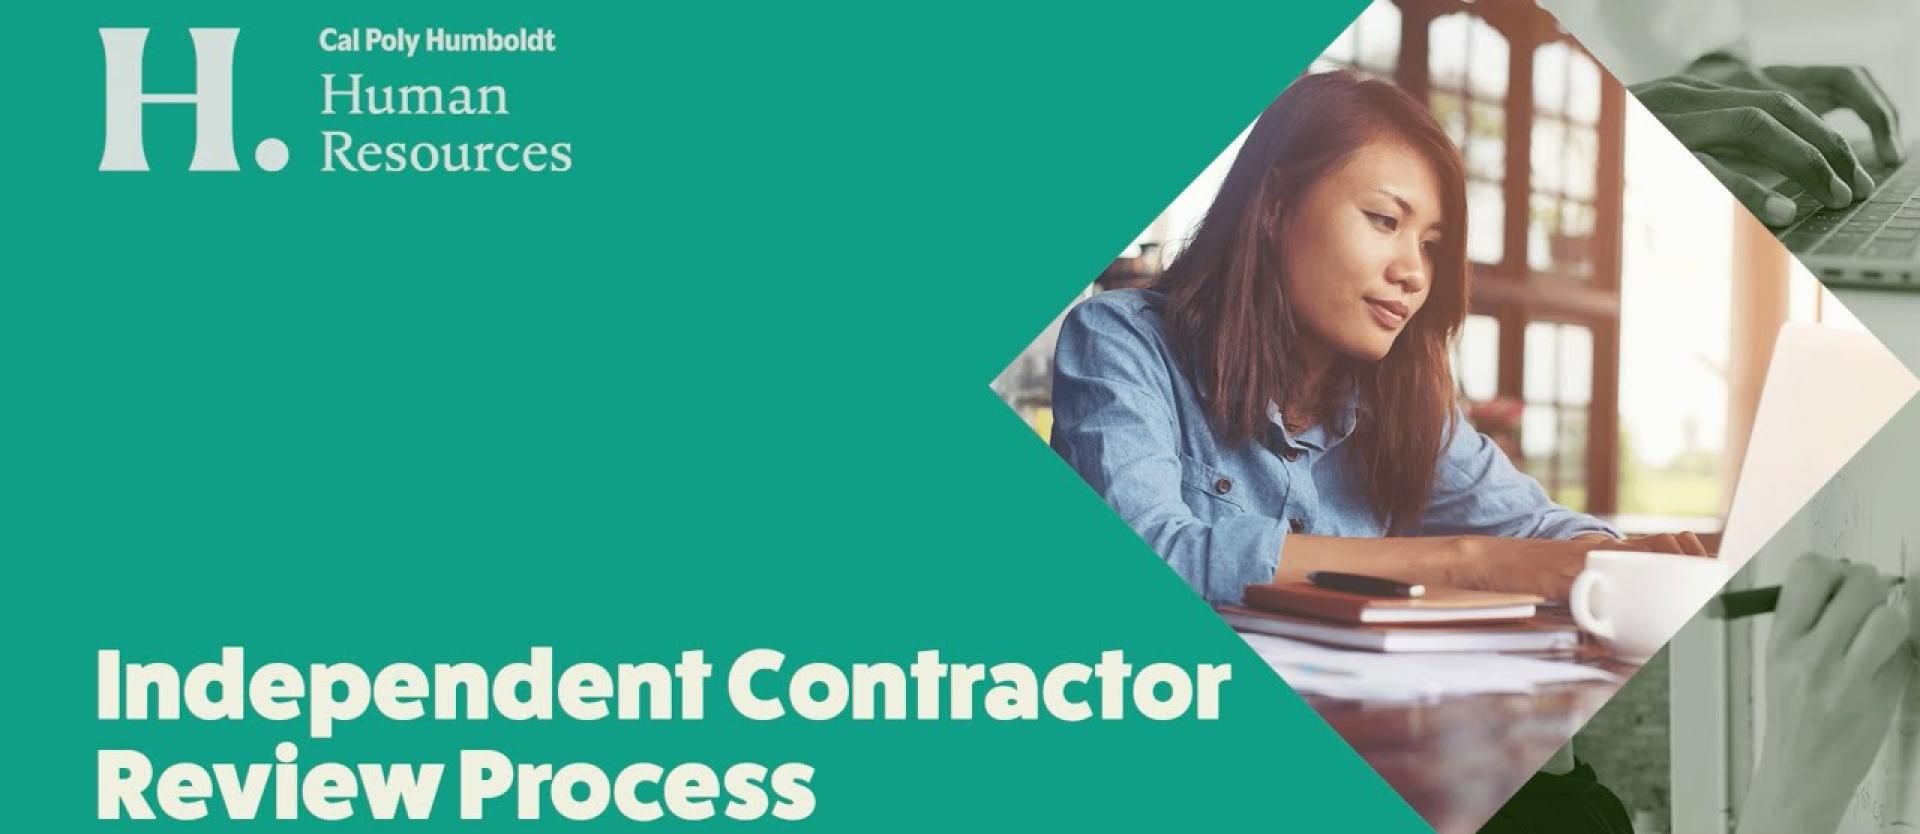 Independent Contractor Review Process